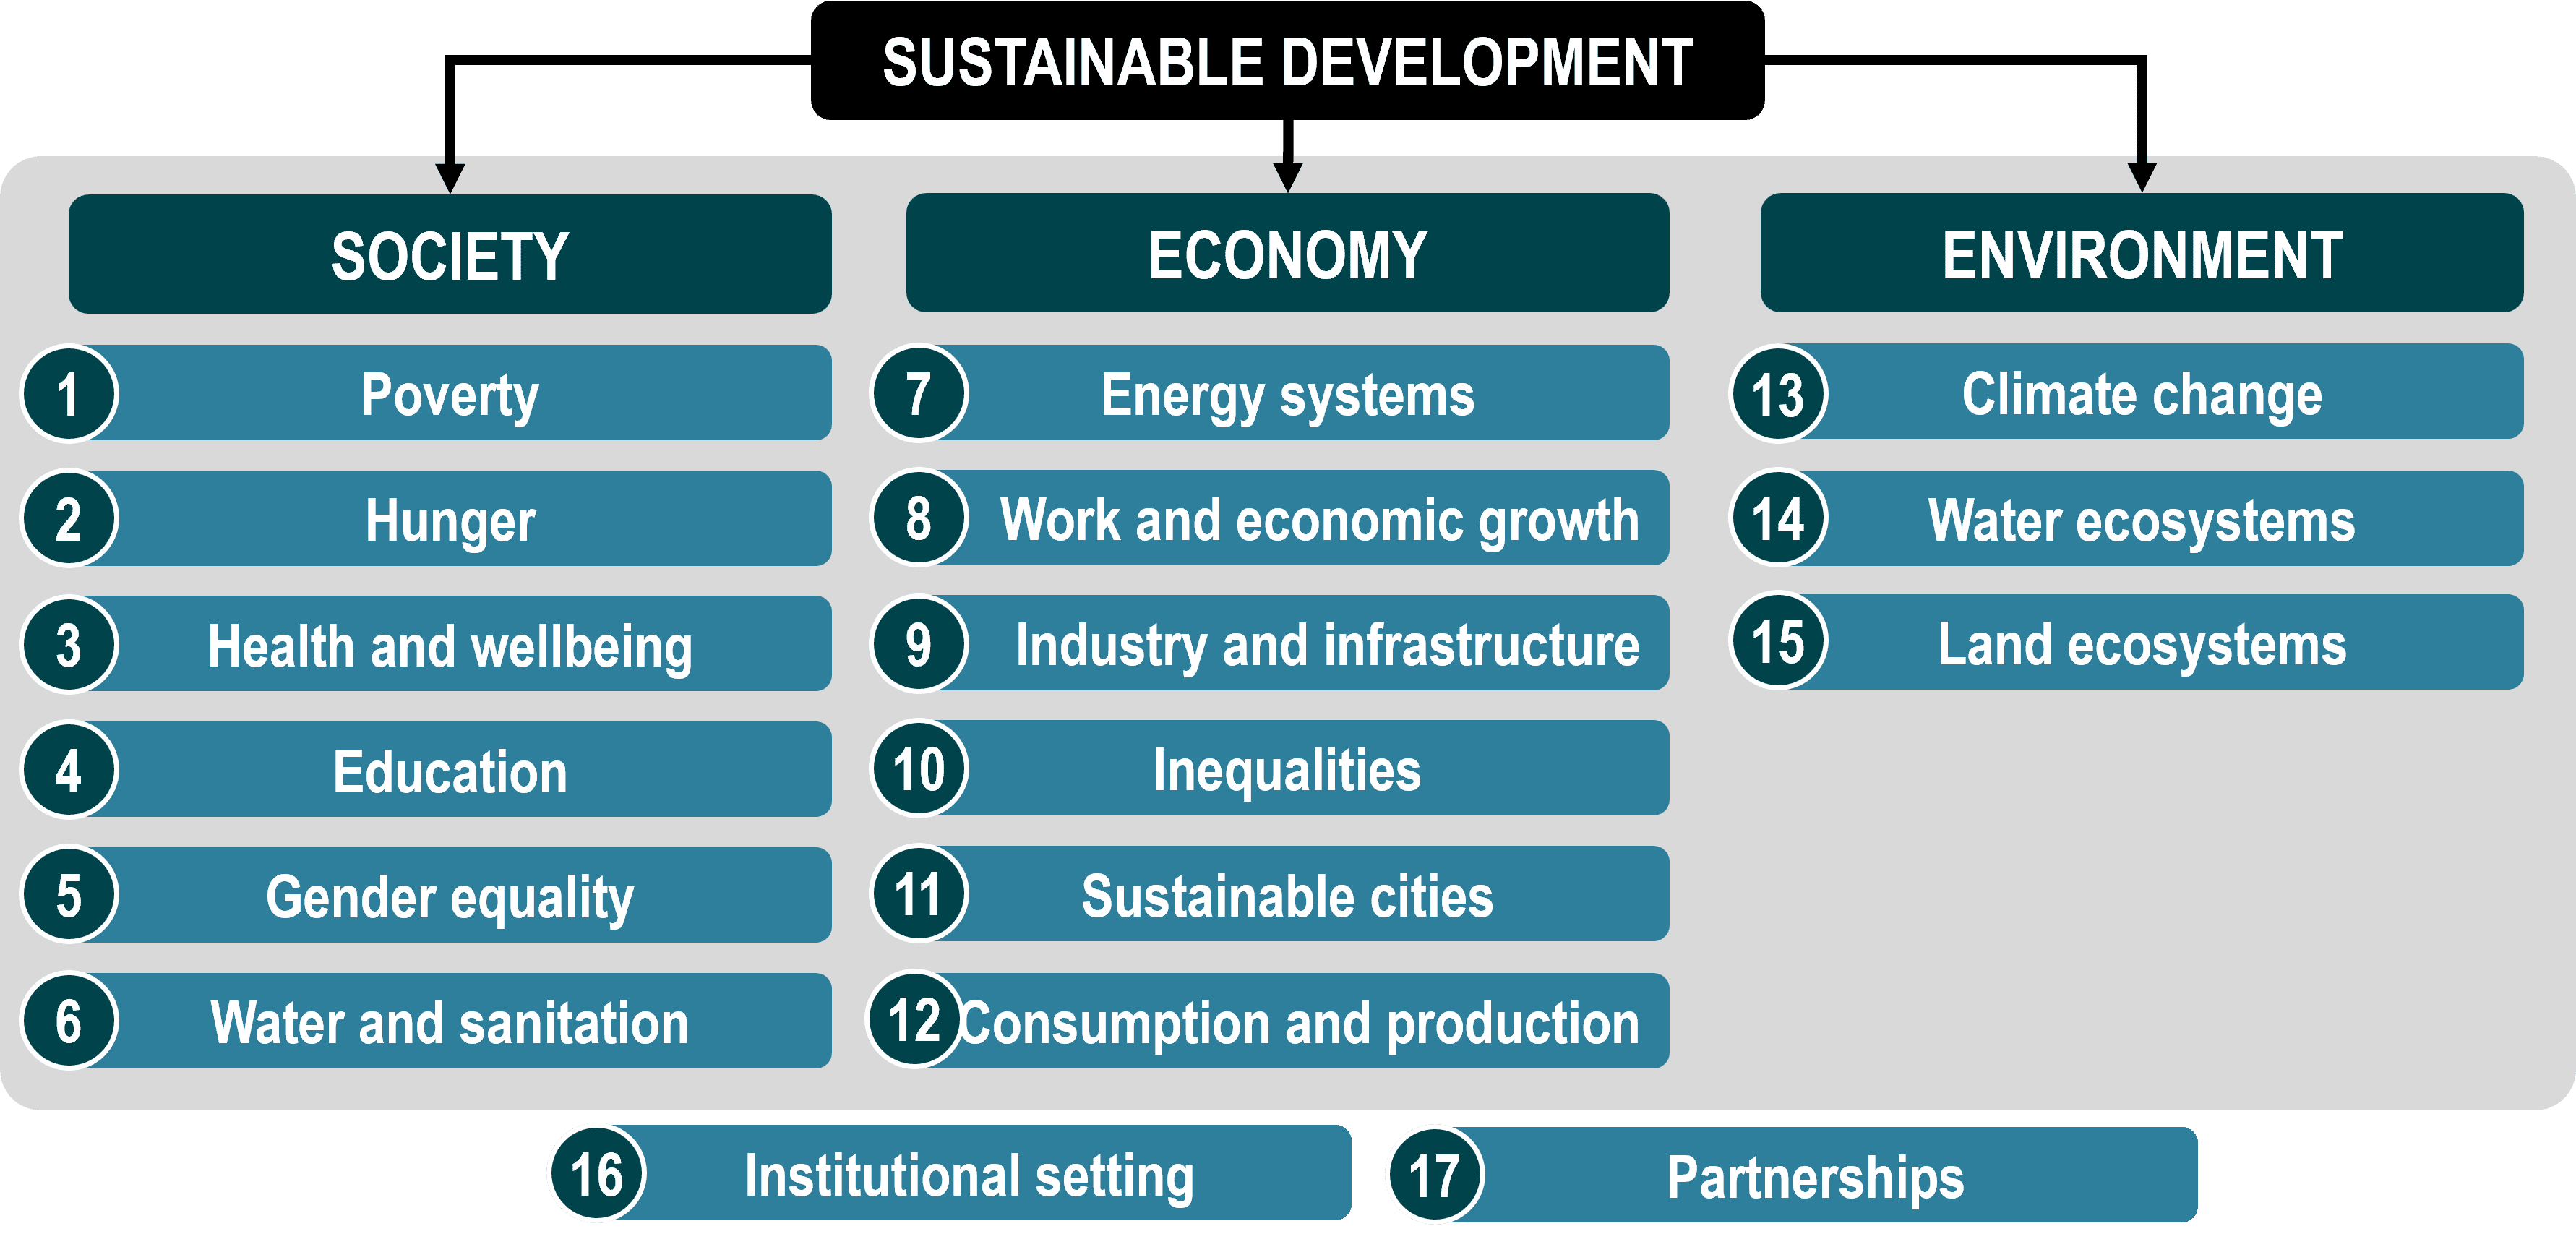 Sustainable Development goals. Sustainable Development the Direction of the economy. Institutional Governance. Ssp45 develop. Development setting